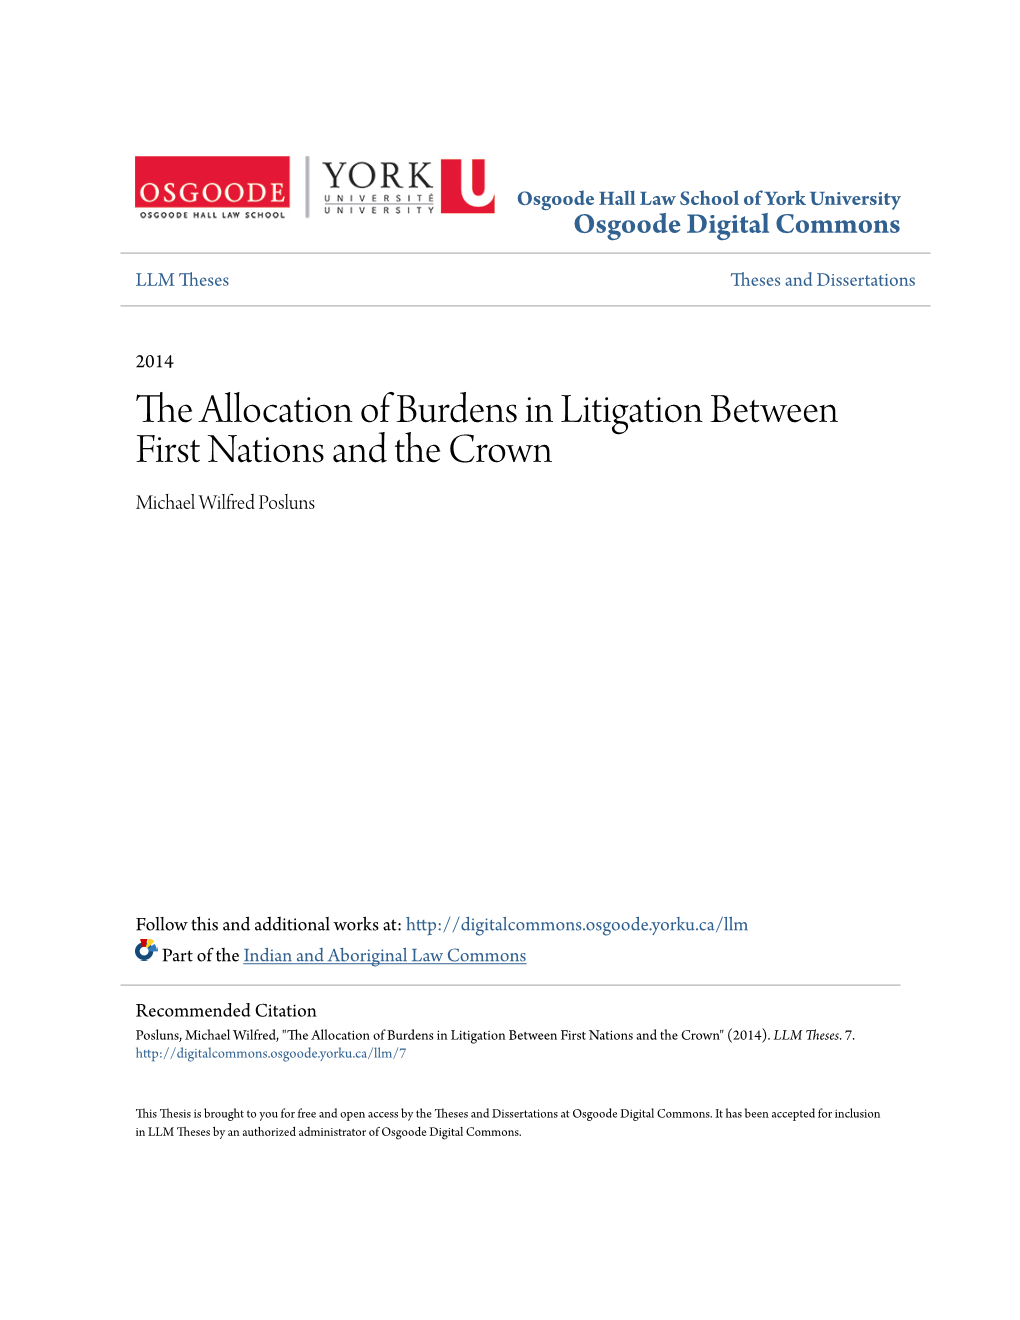 The Allocation of Burdens in Litigation Between First Nations and the Crown Michael Wilfred Posluns